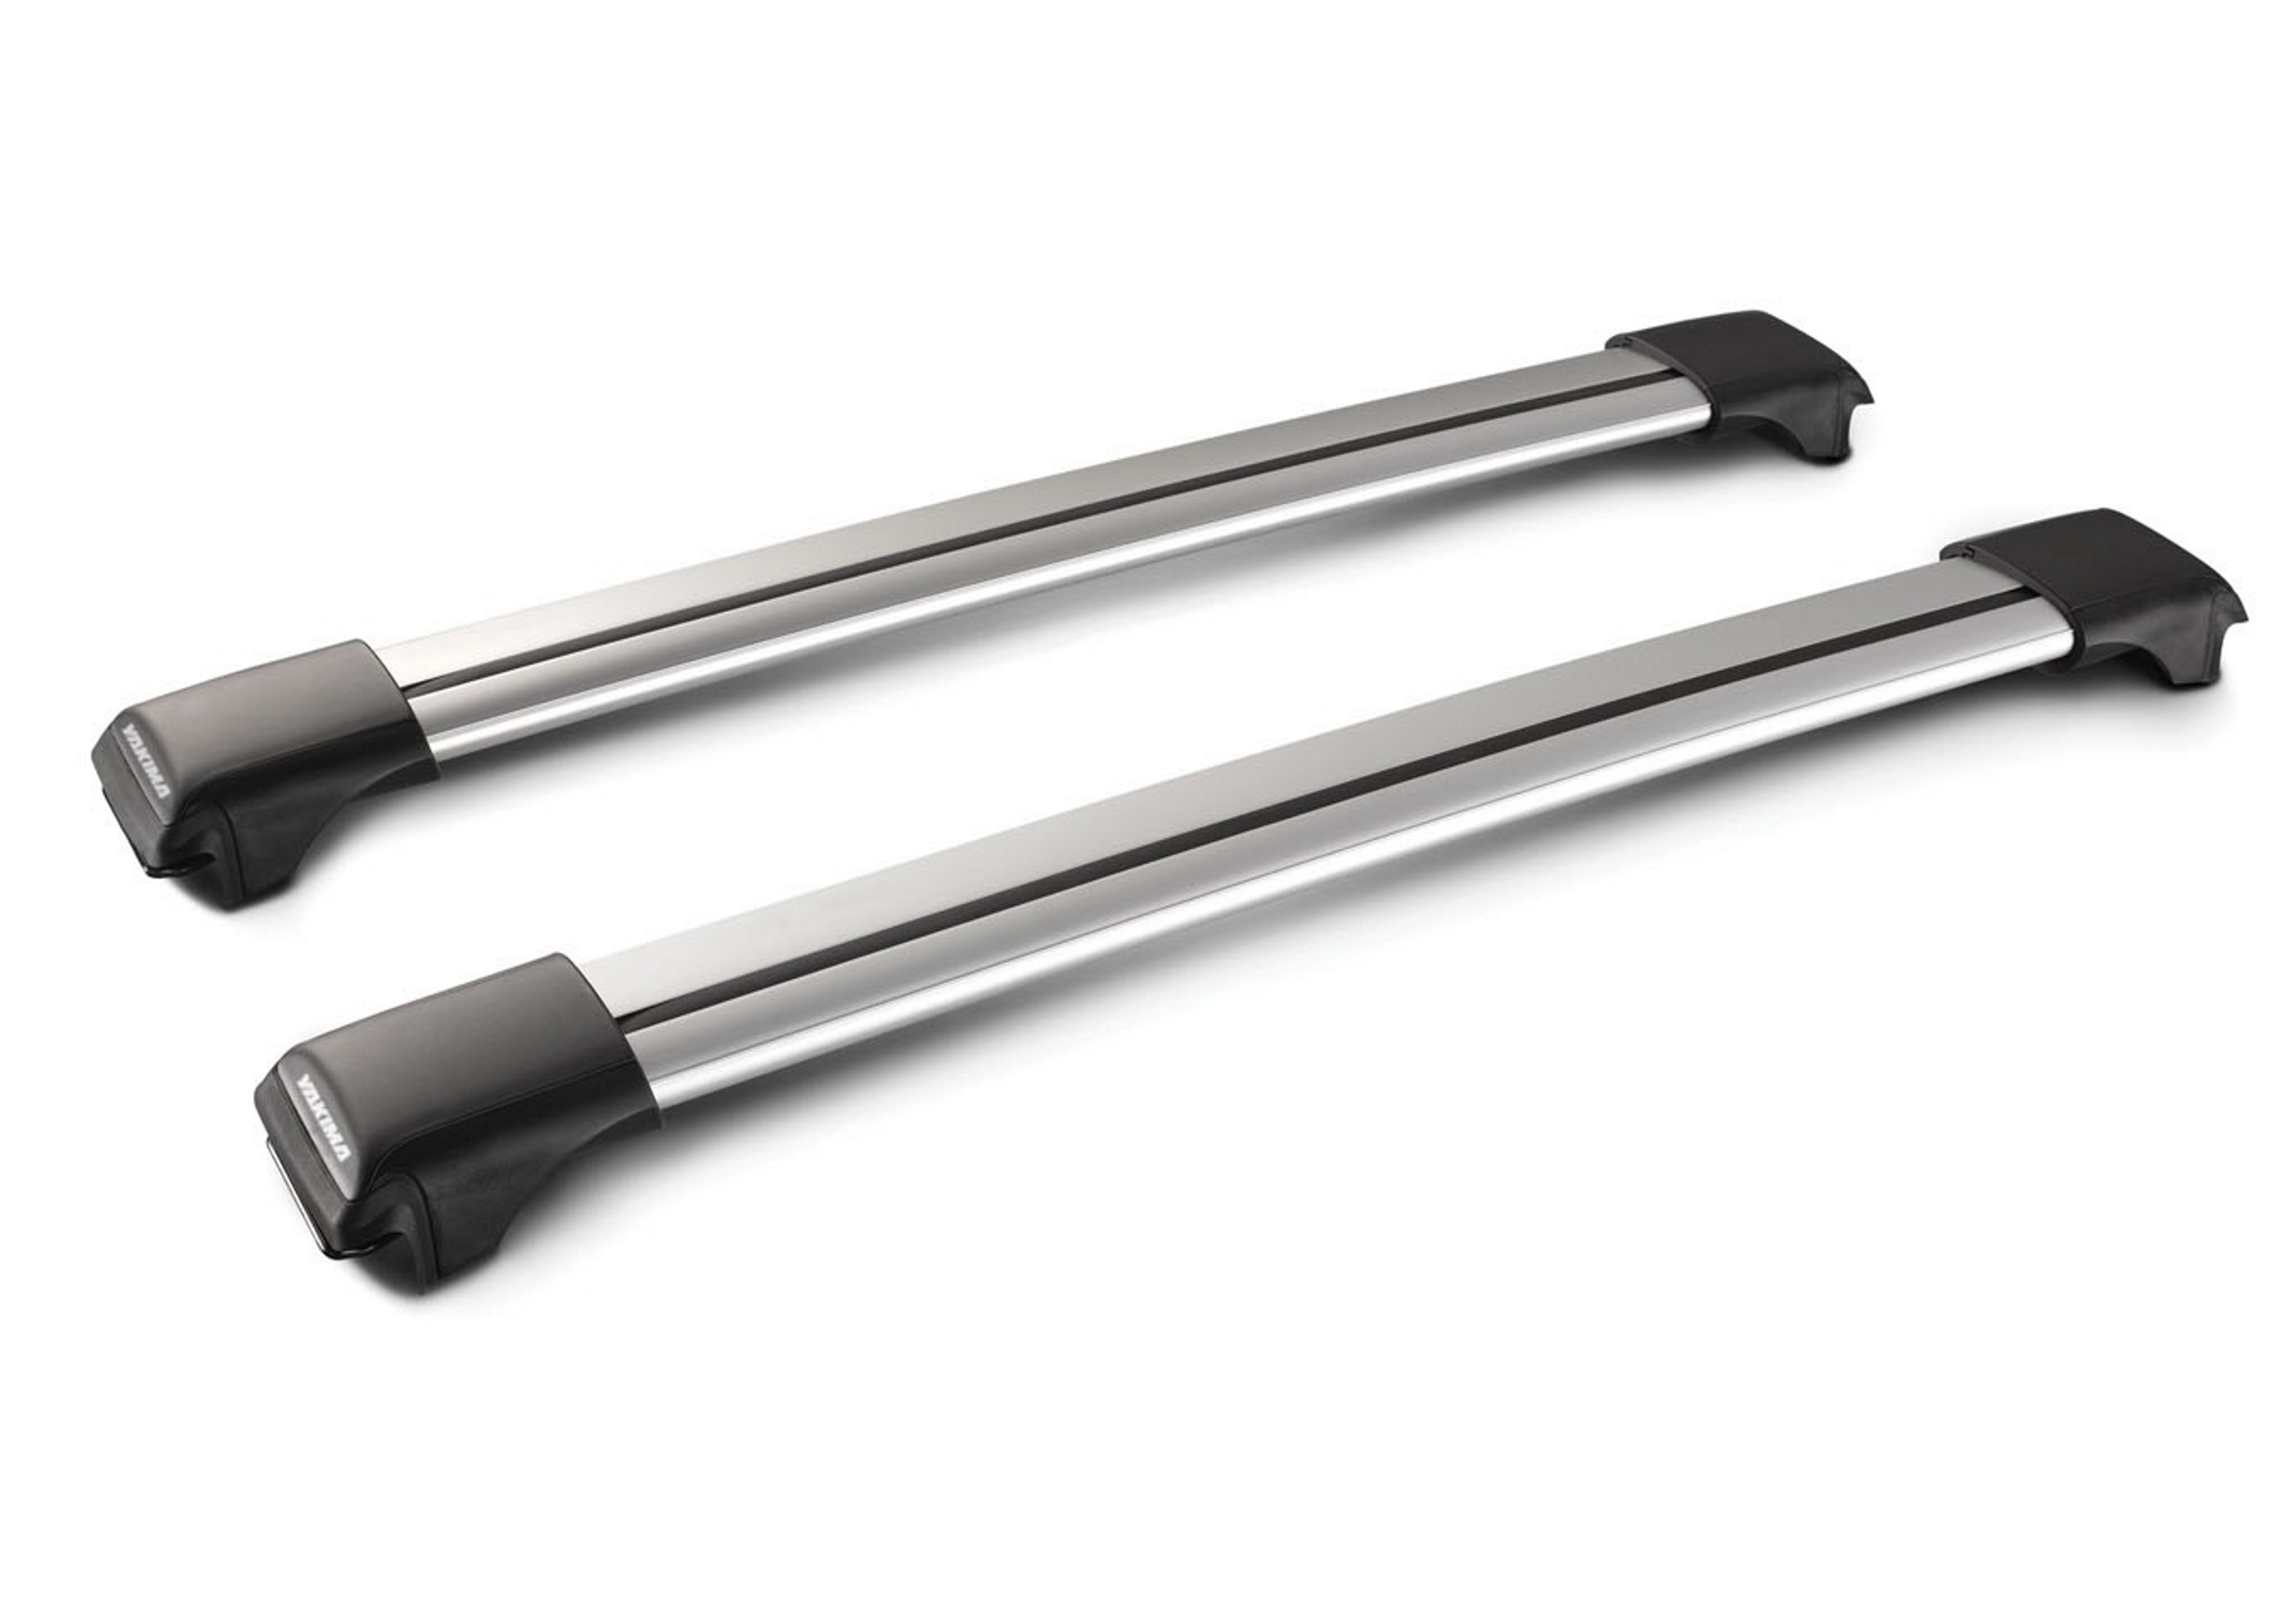 Volkswagen VW Golf estate (2007 to 2009):Yakima roof bars package - S53 Aero-X silver bars